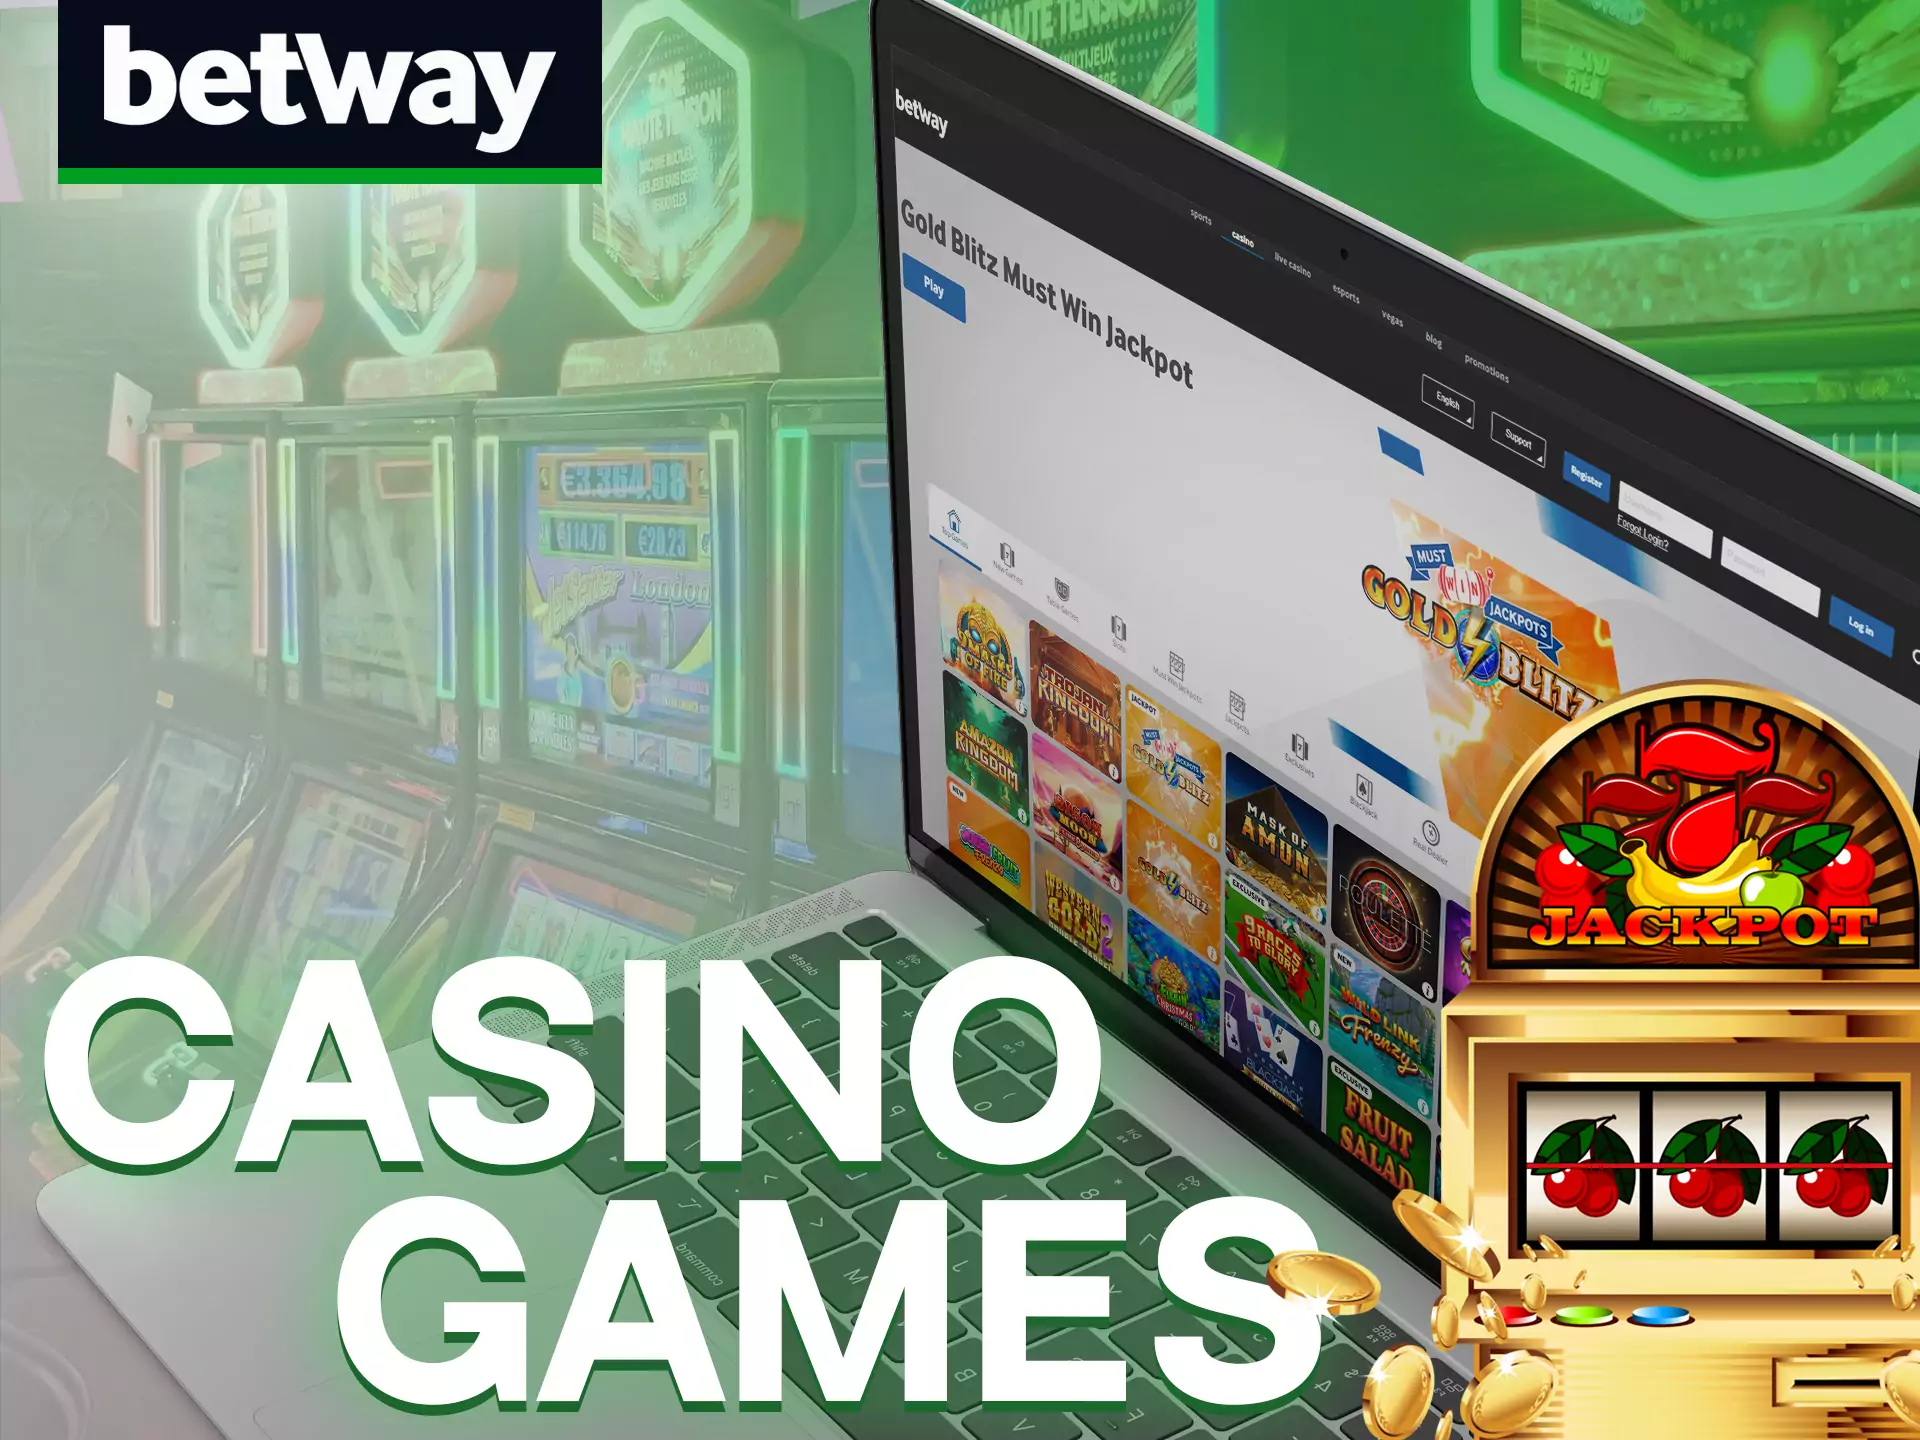 Search for your favourite Betway casino games.